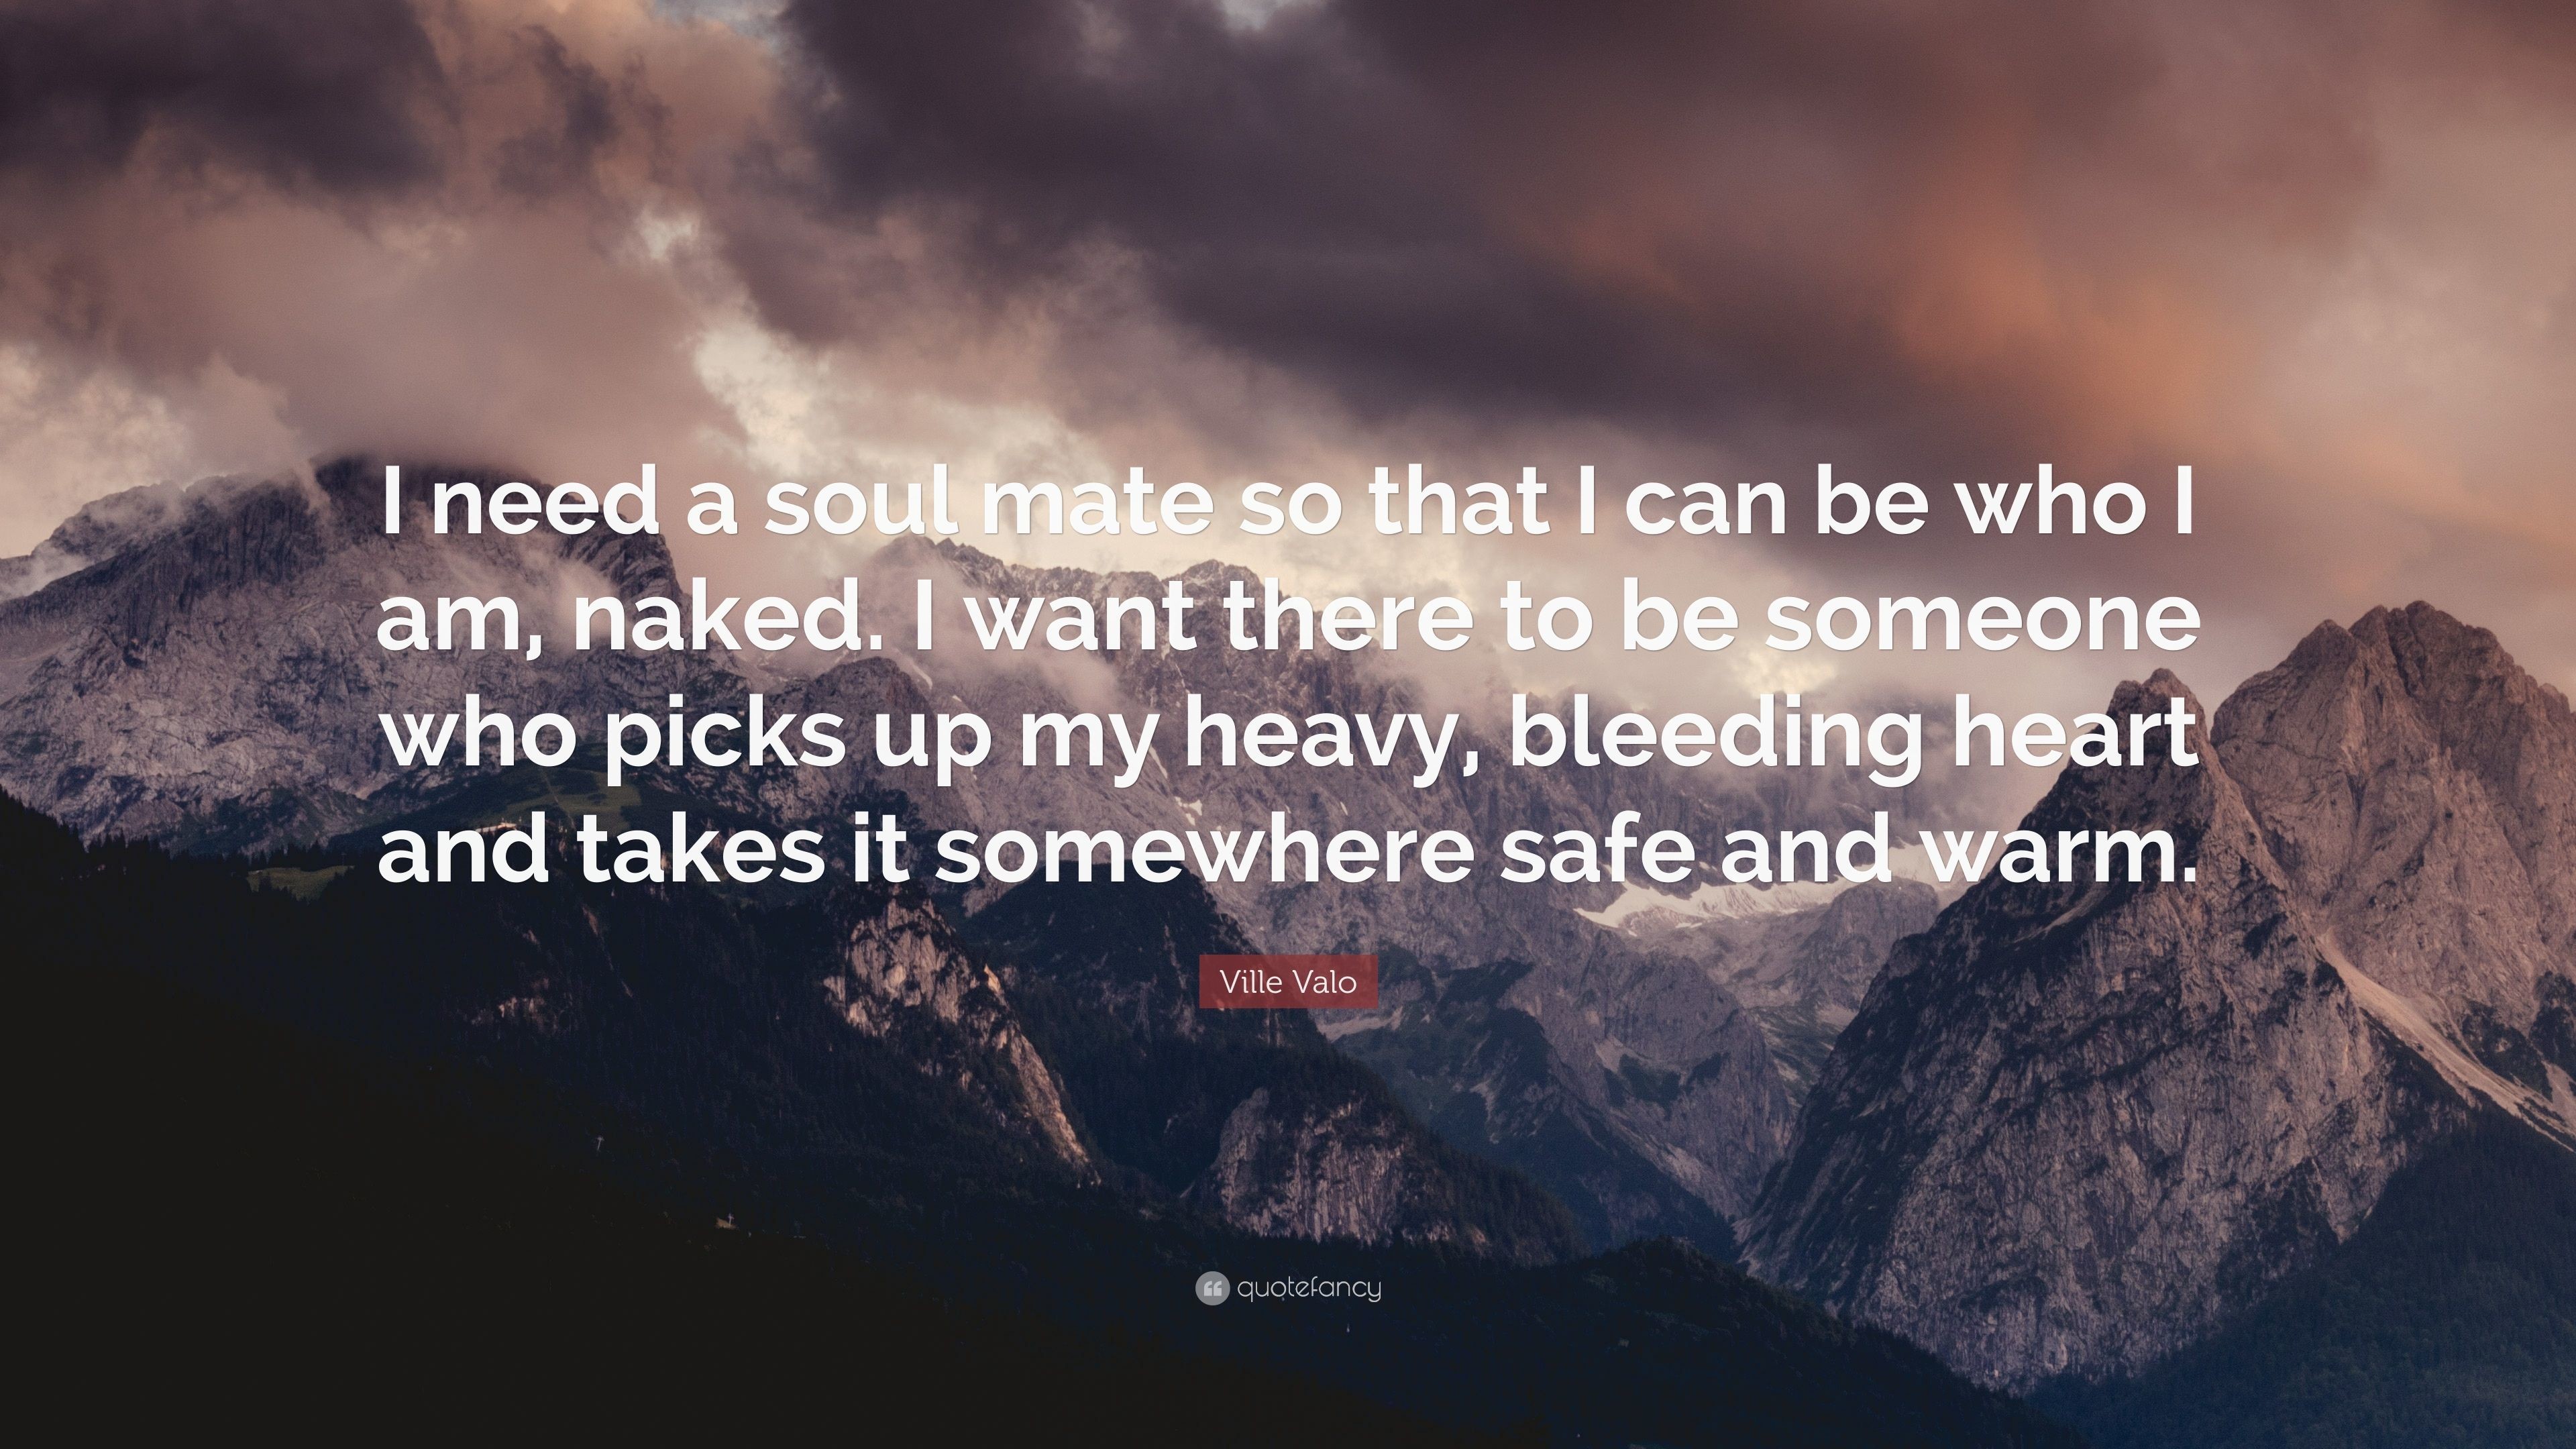 3840x2160 Ville Valo Quote: “I need a soul mate so that I can be who